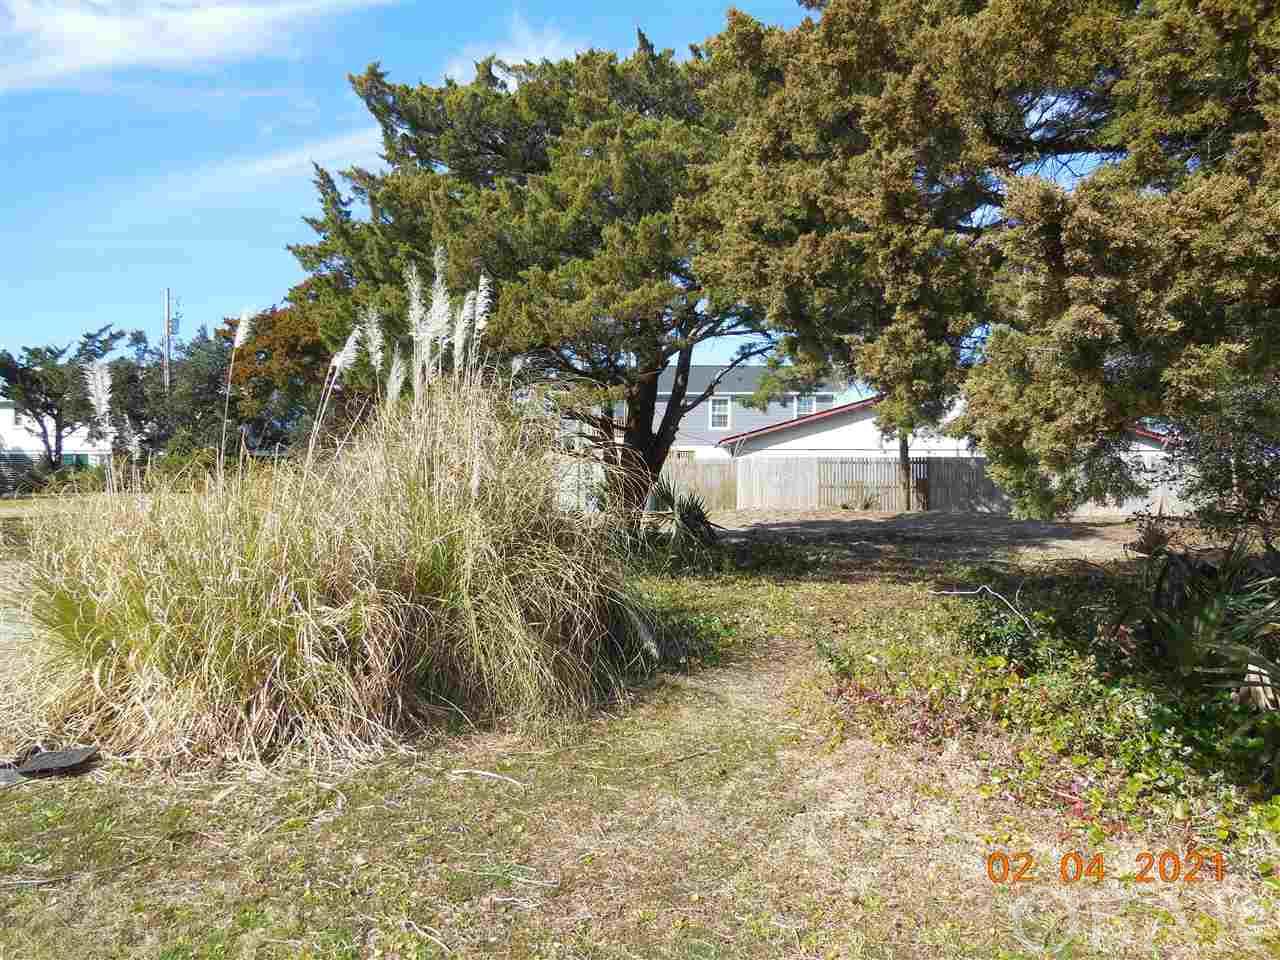 A 5117 sq. ft. lot in Live Oak Village, a new 7 lot subdivision in the heart of Ocracoke Village. Conveniently located and within walking distance to all village activities. Conveys with a 4 bedroom septic permit and a 3 bedroom/2 bath water meter. Restrictive Covenants in place to maintain the historic charm and quaintness of Ocracoke Village. Many house designs to choose from! Start calling Ocracoke home! Taxes are an estimate only. Currently being taxed as one large parcel.